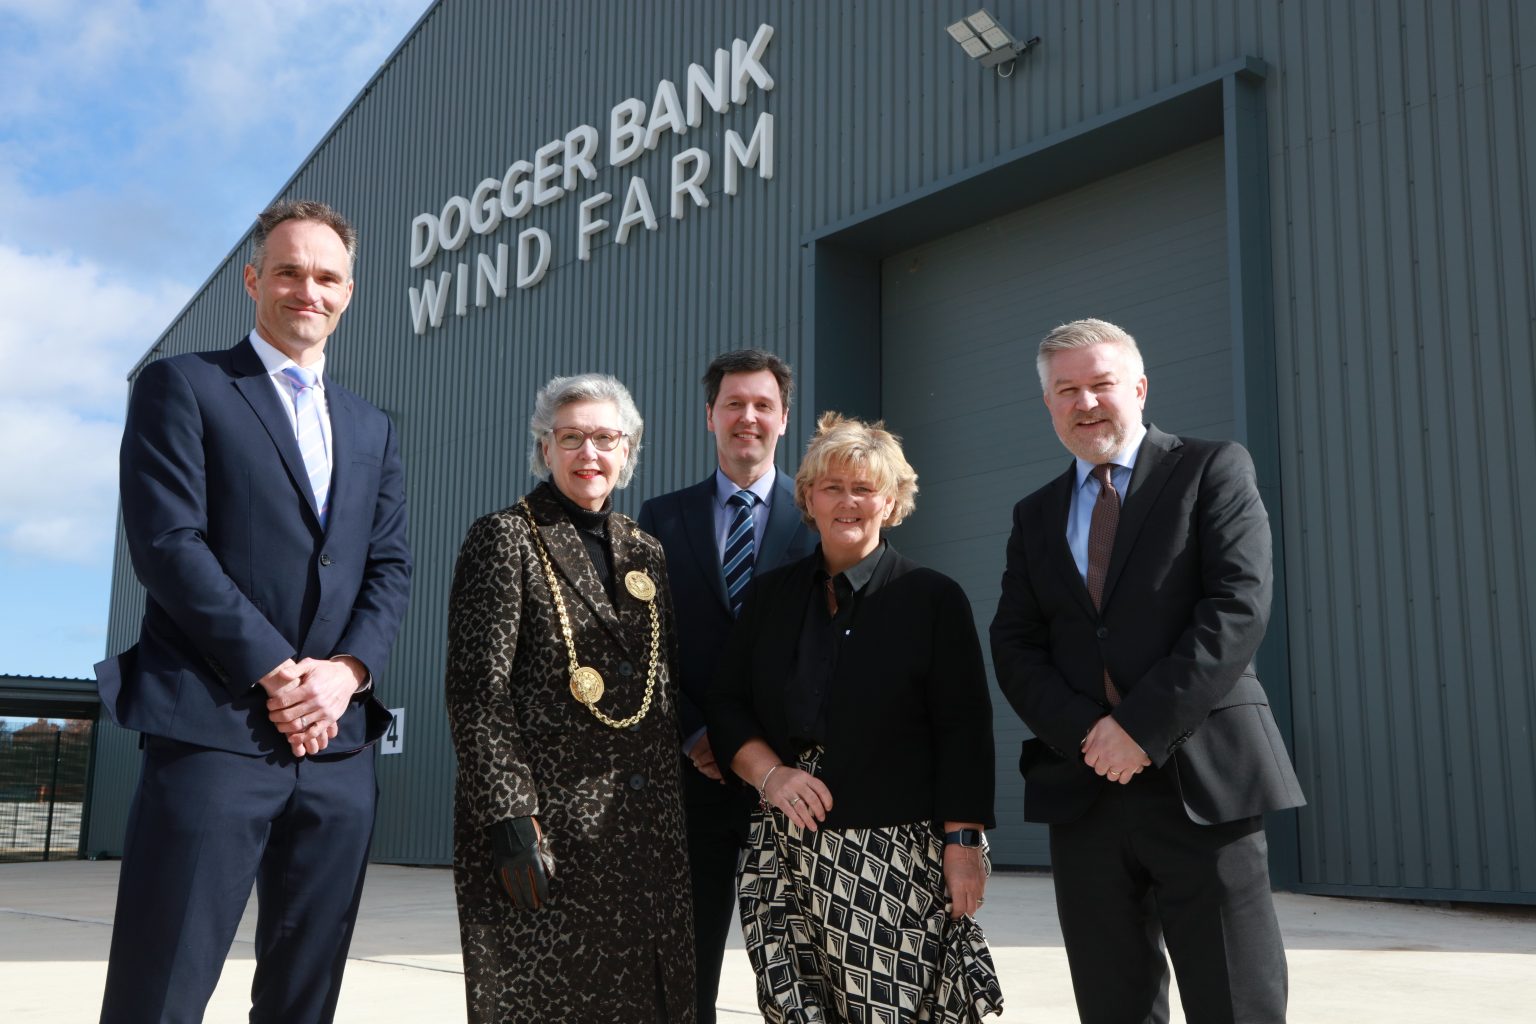 Dogger Bank Wind Farm Officially Celebrates its Operations and Maintenance Base Opening